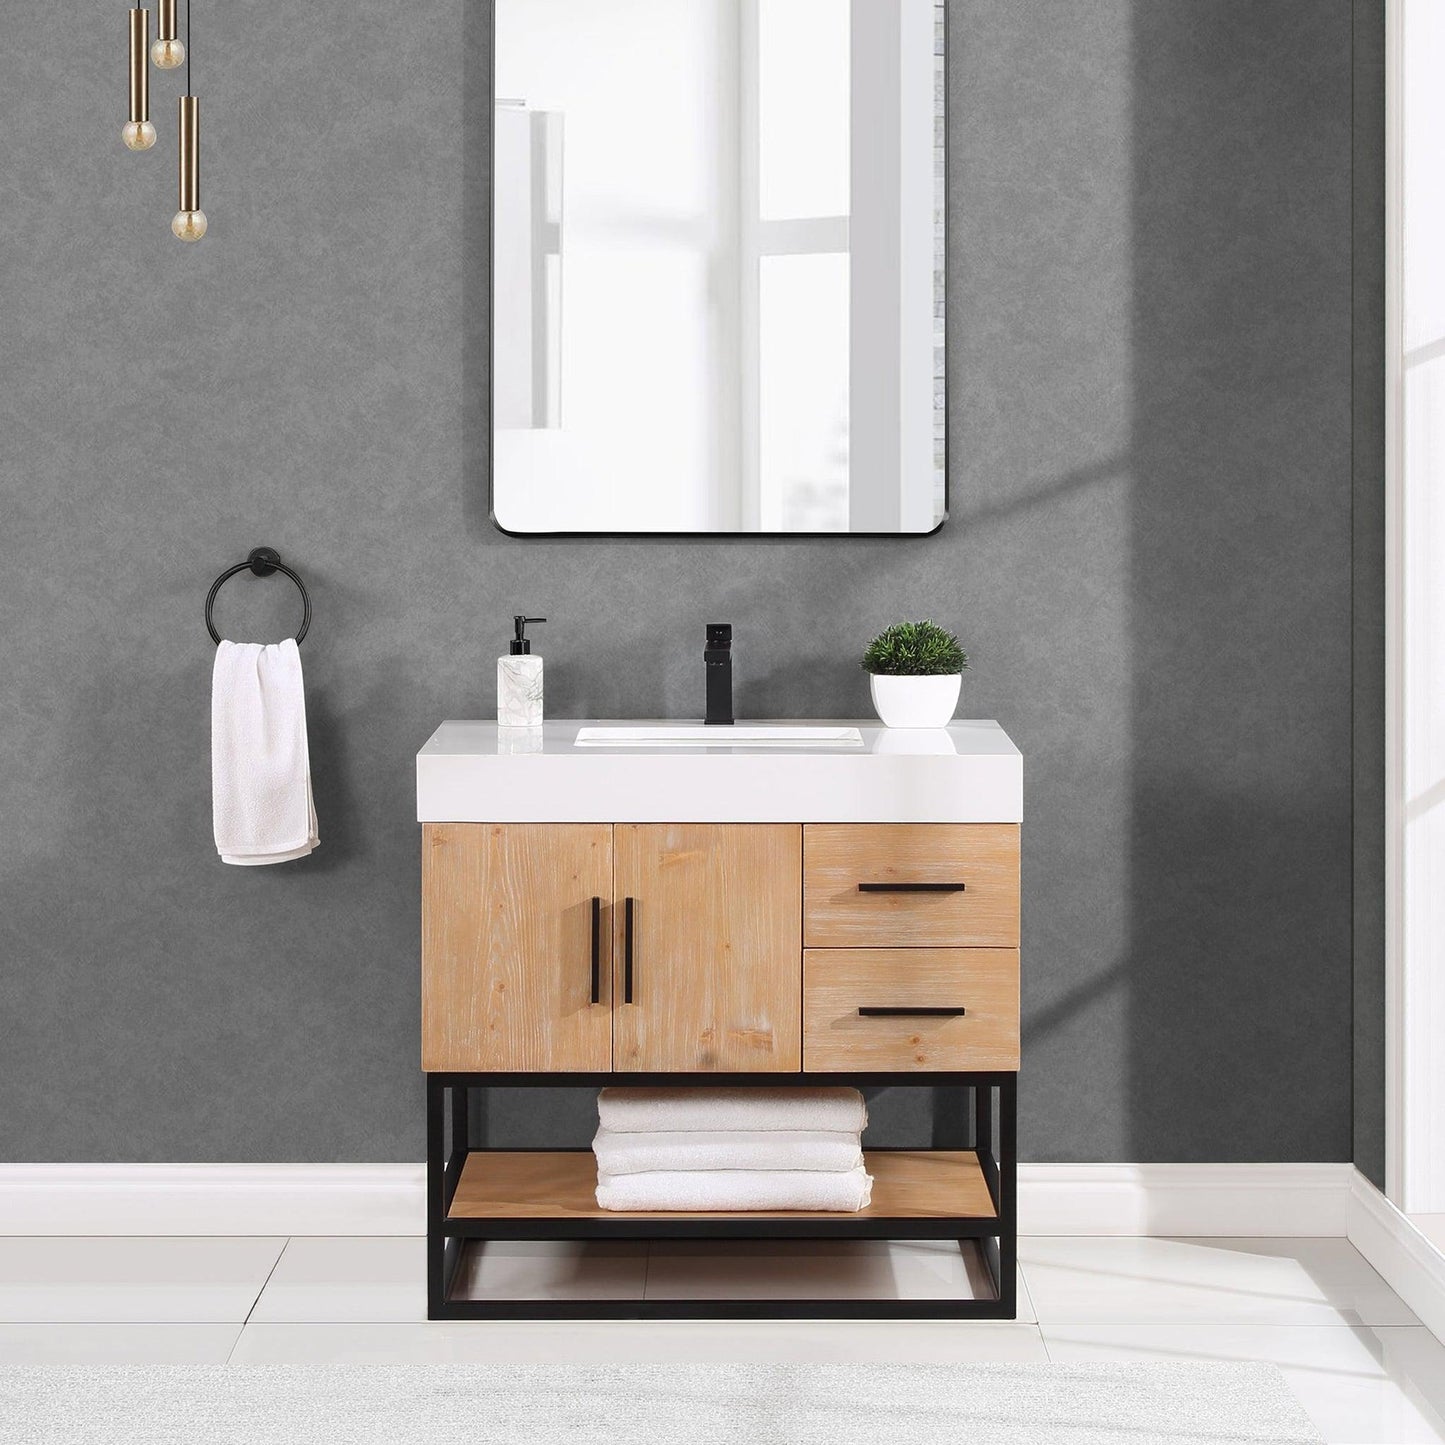 Altair Bianco 36" Light Brown Freestanding Single Bathroom Vanity Set With Matte Black Support Base, White Composite Stone Top, Single Rectangular Undermount Ceramic Sink, and Overflow